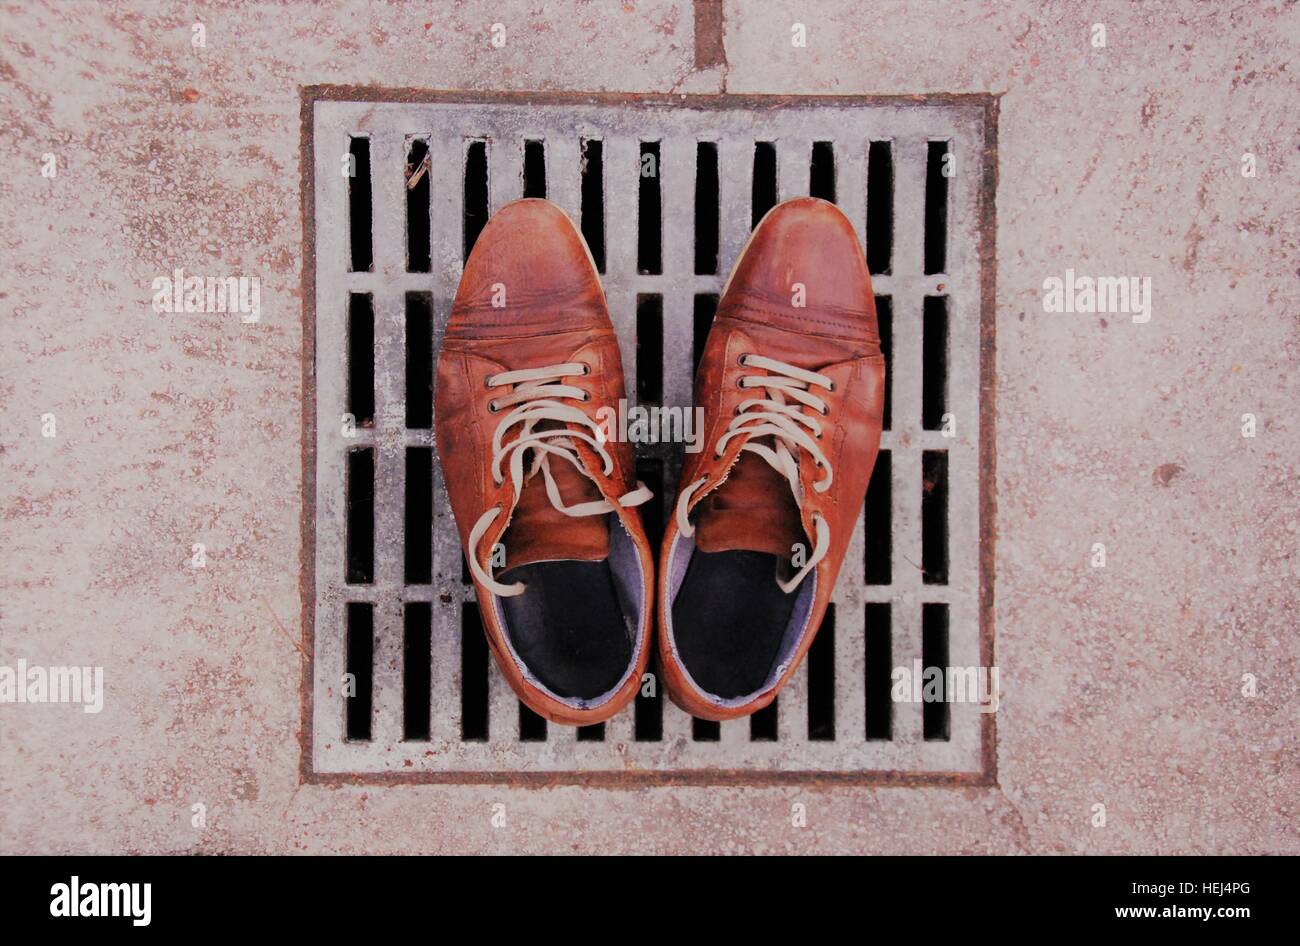 LIFE FATE-SINGLE MAN: Empty shoes on the drain Stock Photo